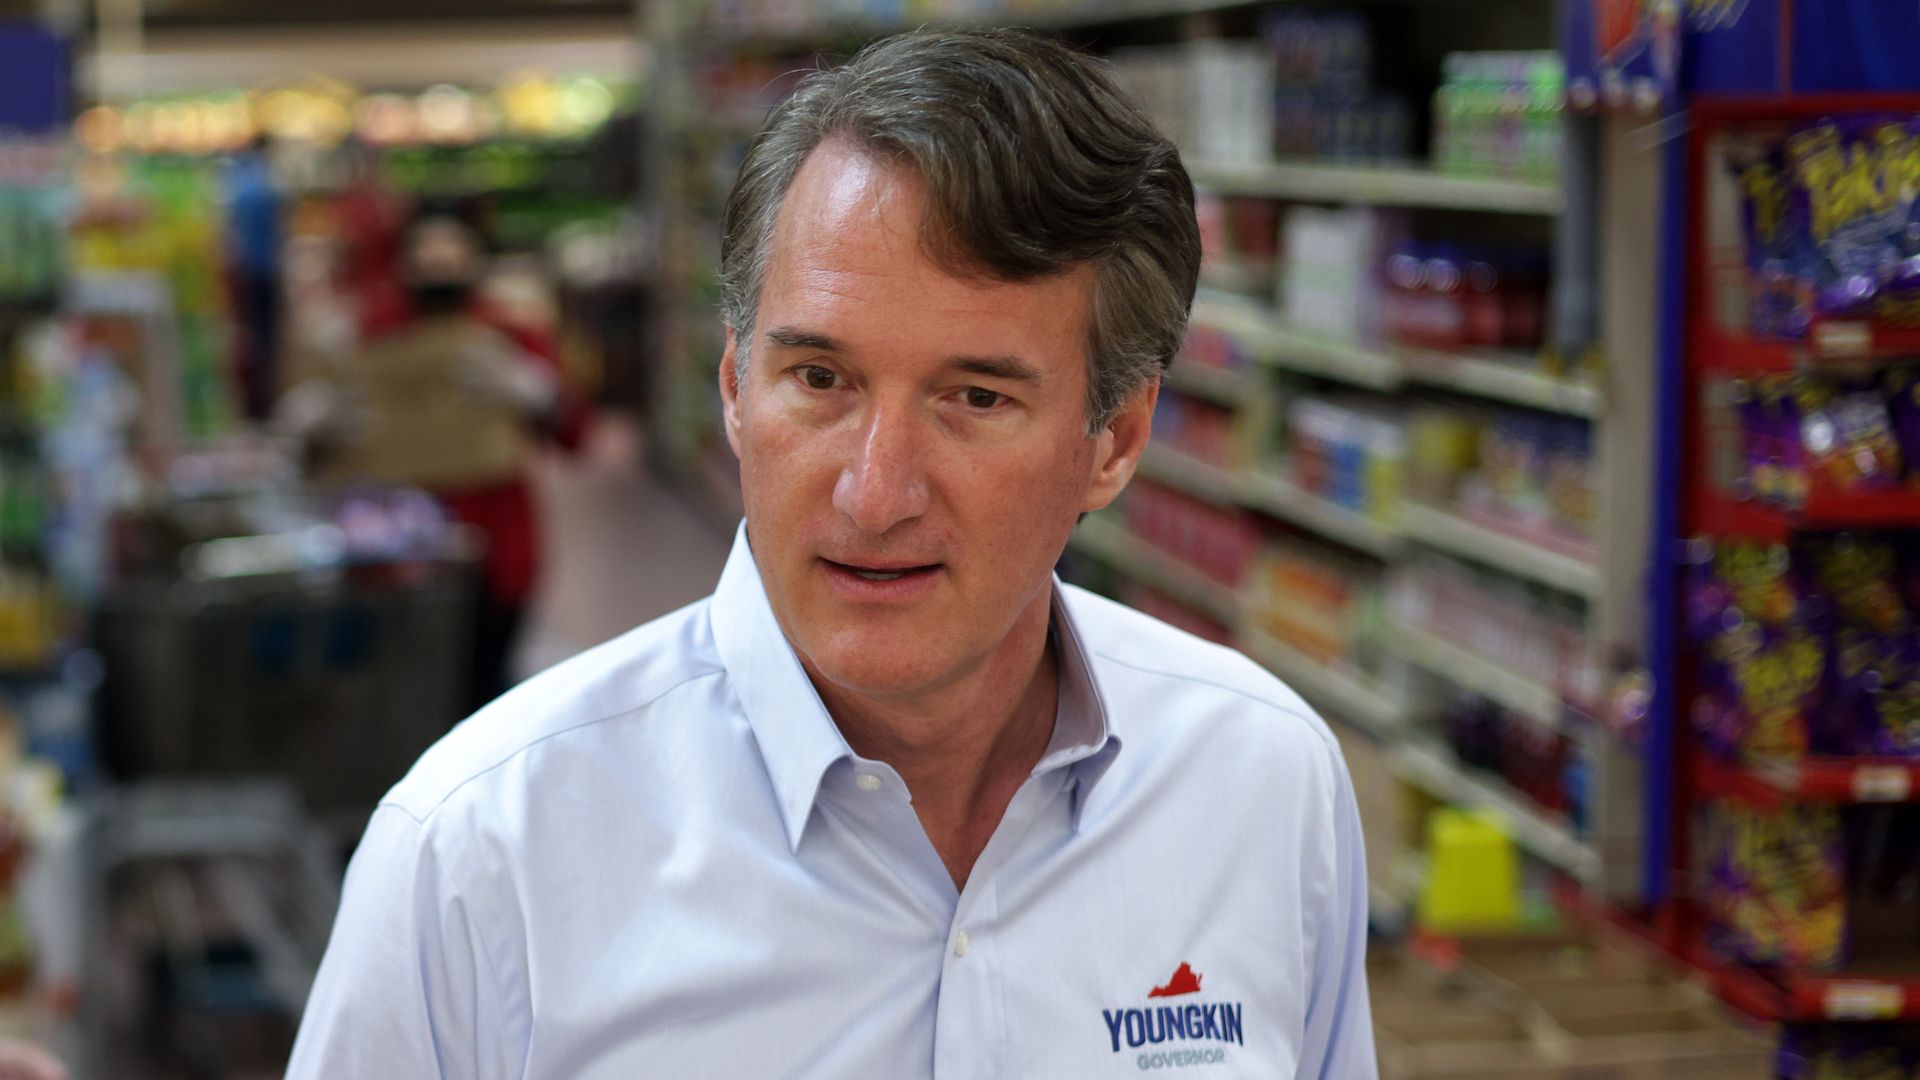 Virginia gubernatorial candidate Glenn Youngkin is seen during a campaign appearance.